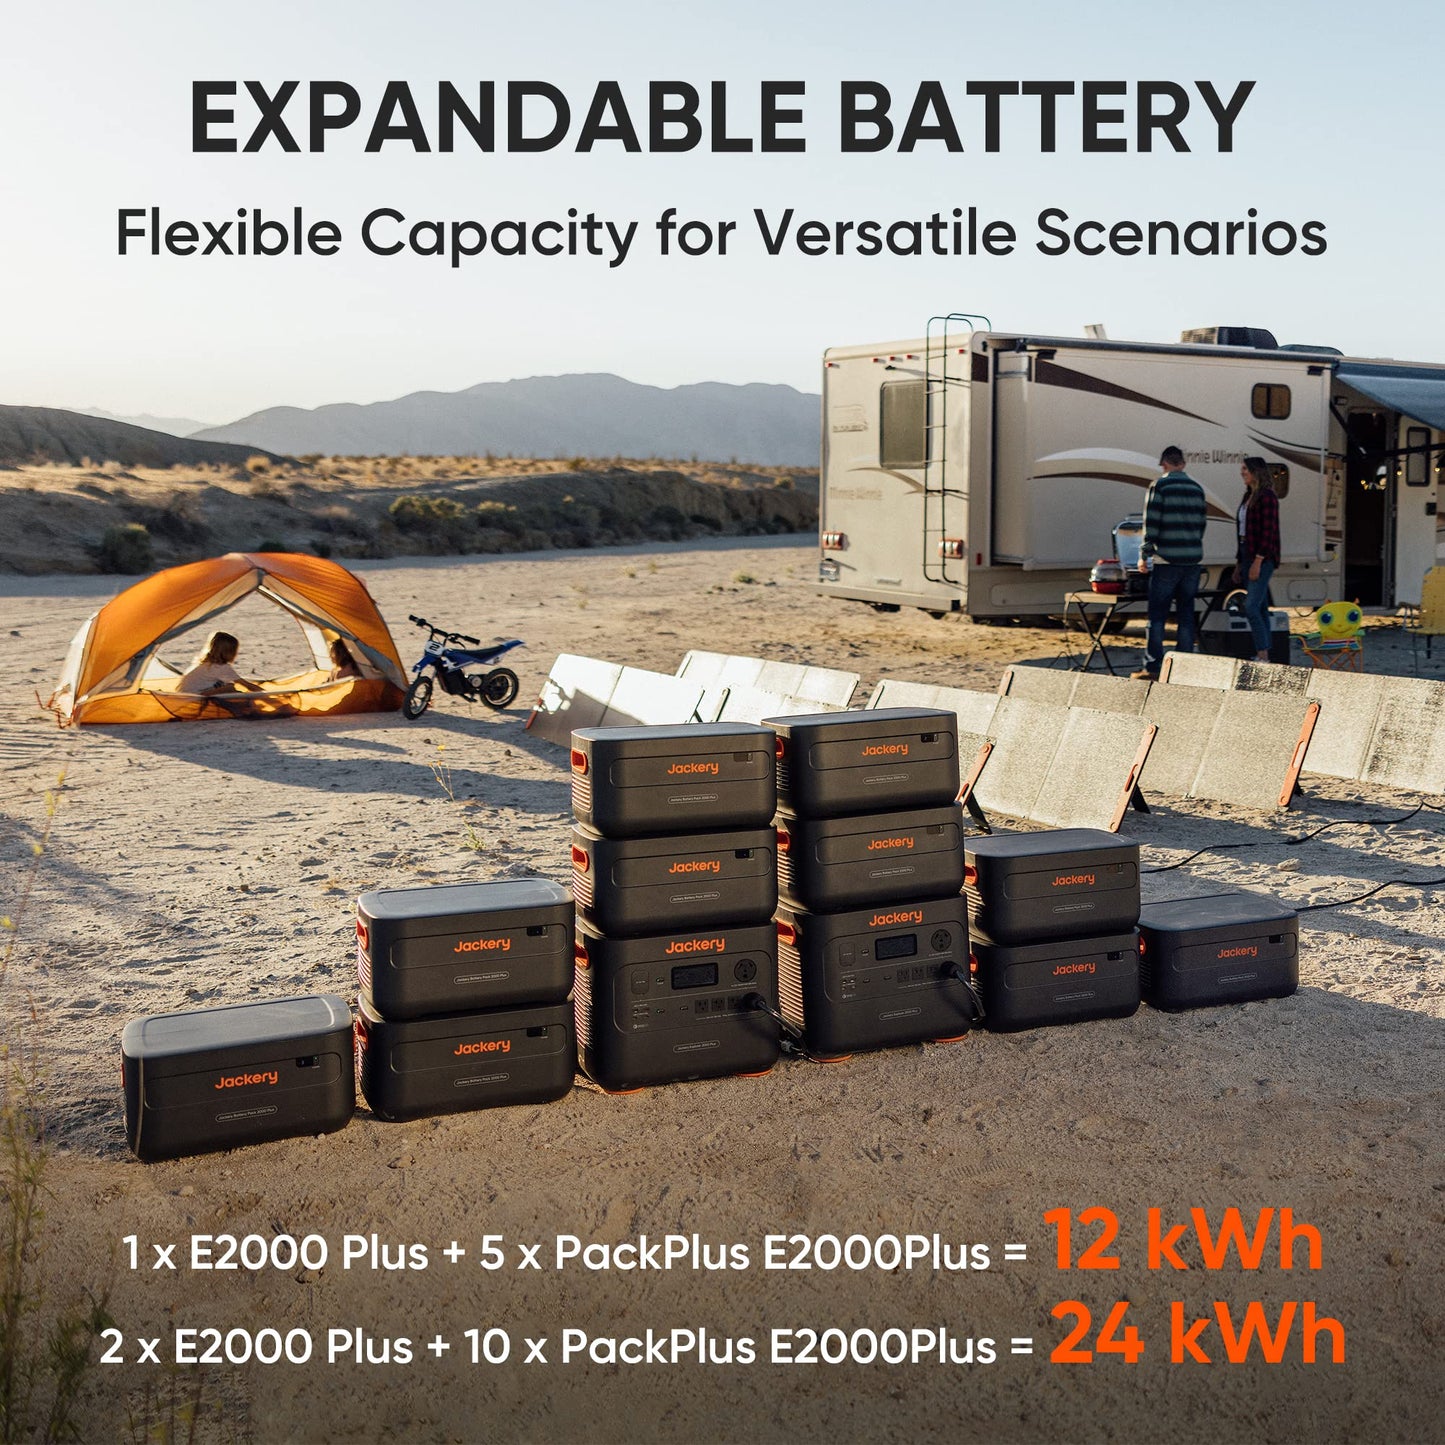 Jackery Explorer Kit 4000, Explorer 2000 Plus and 1X PackPlus E2000 Plus Expandable Battery, 4085 Wh LiFePO4 Battery with 3000W Output for Outdoor RV Camping and Home Emergency Explorer 2000 Plus Kit